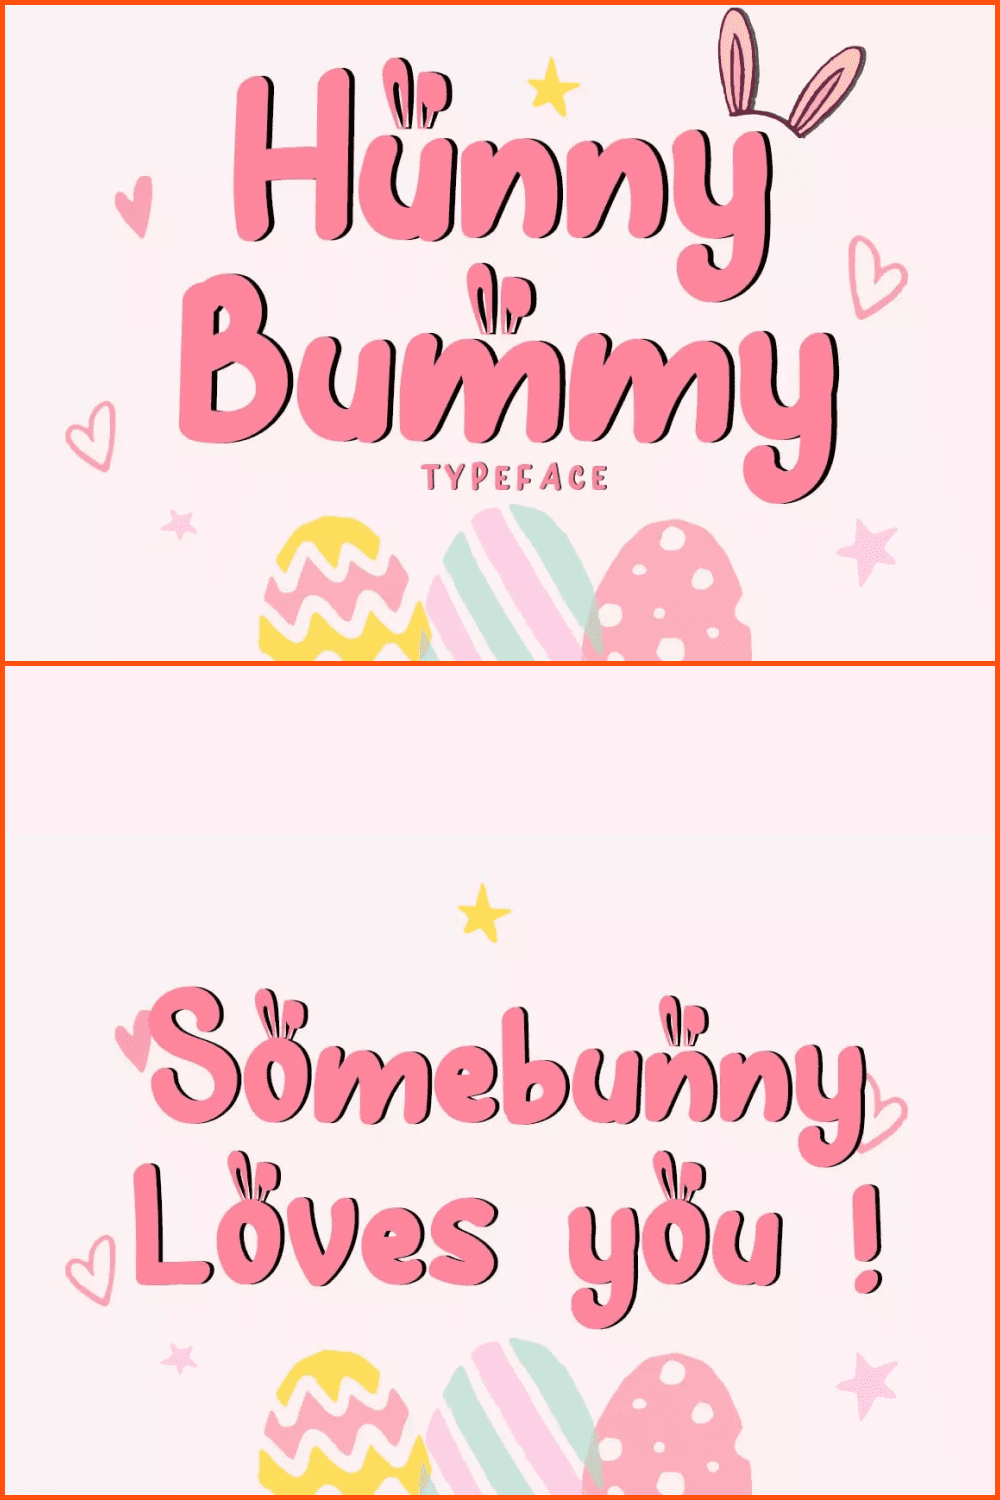 Hunny Bummy Easter Crafty Font.